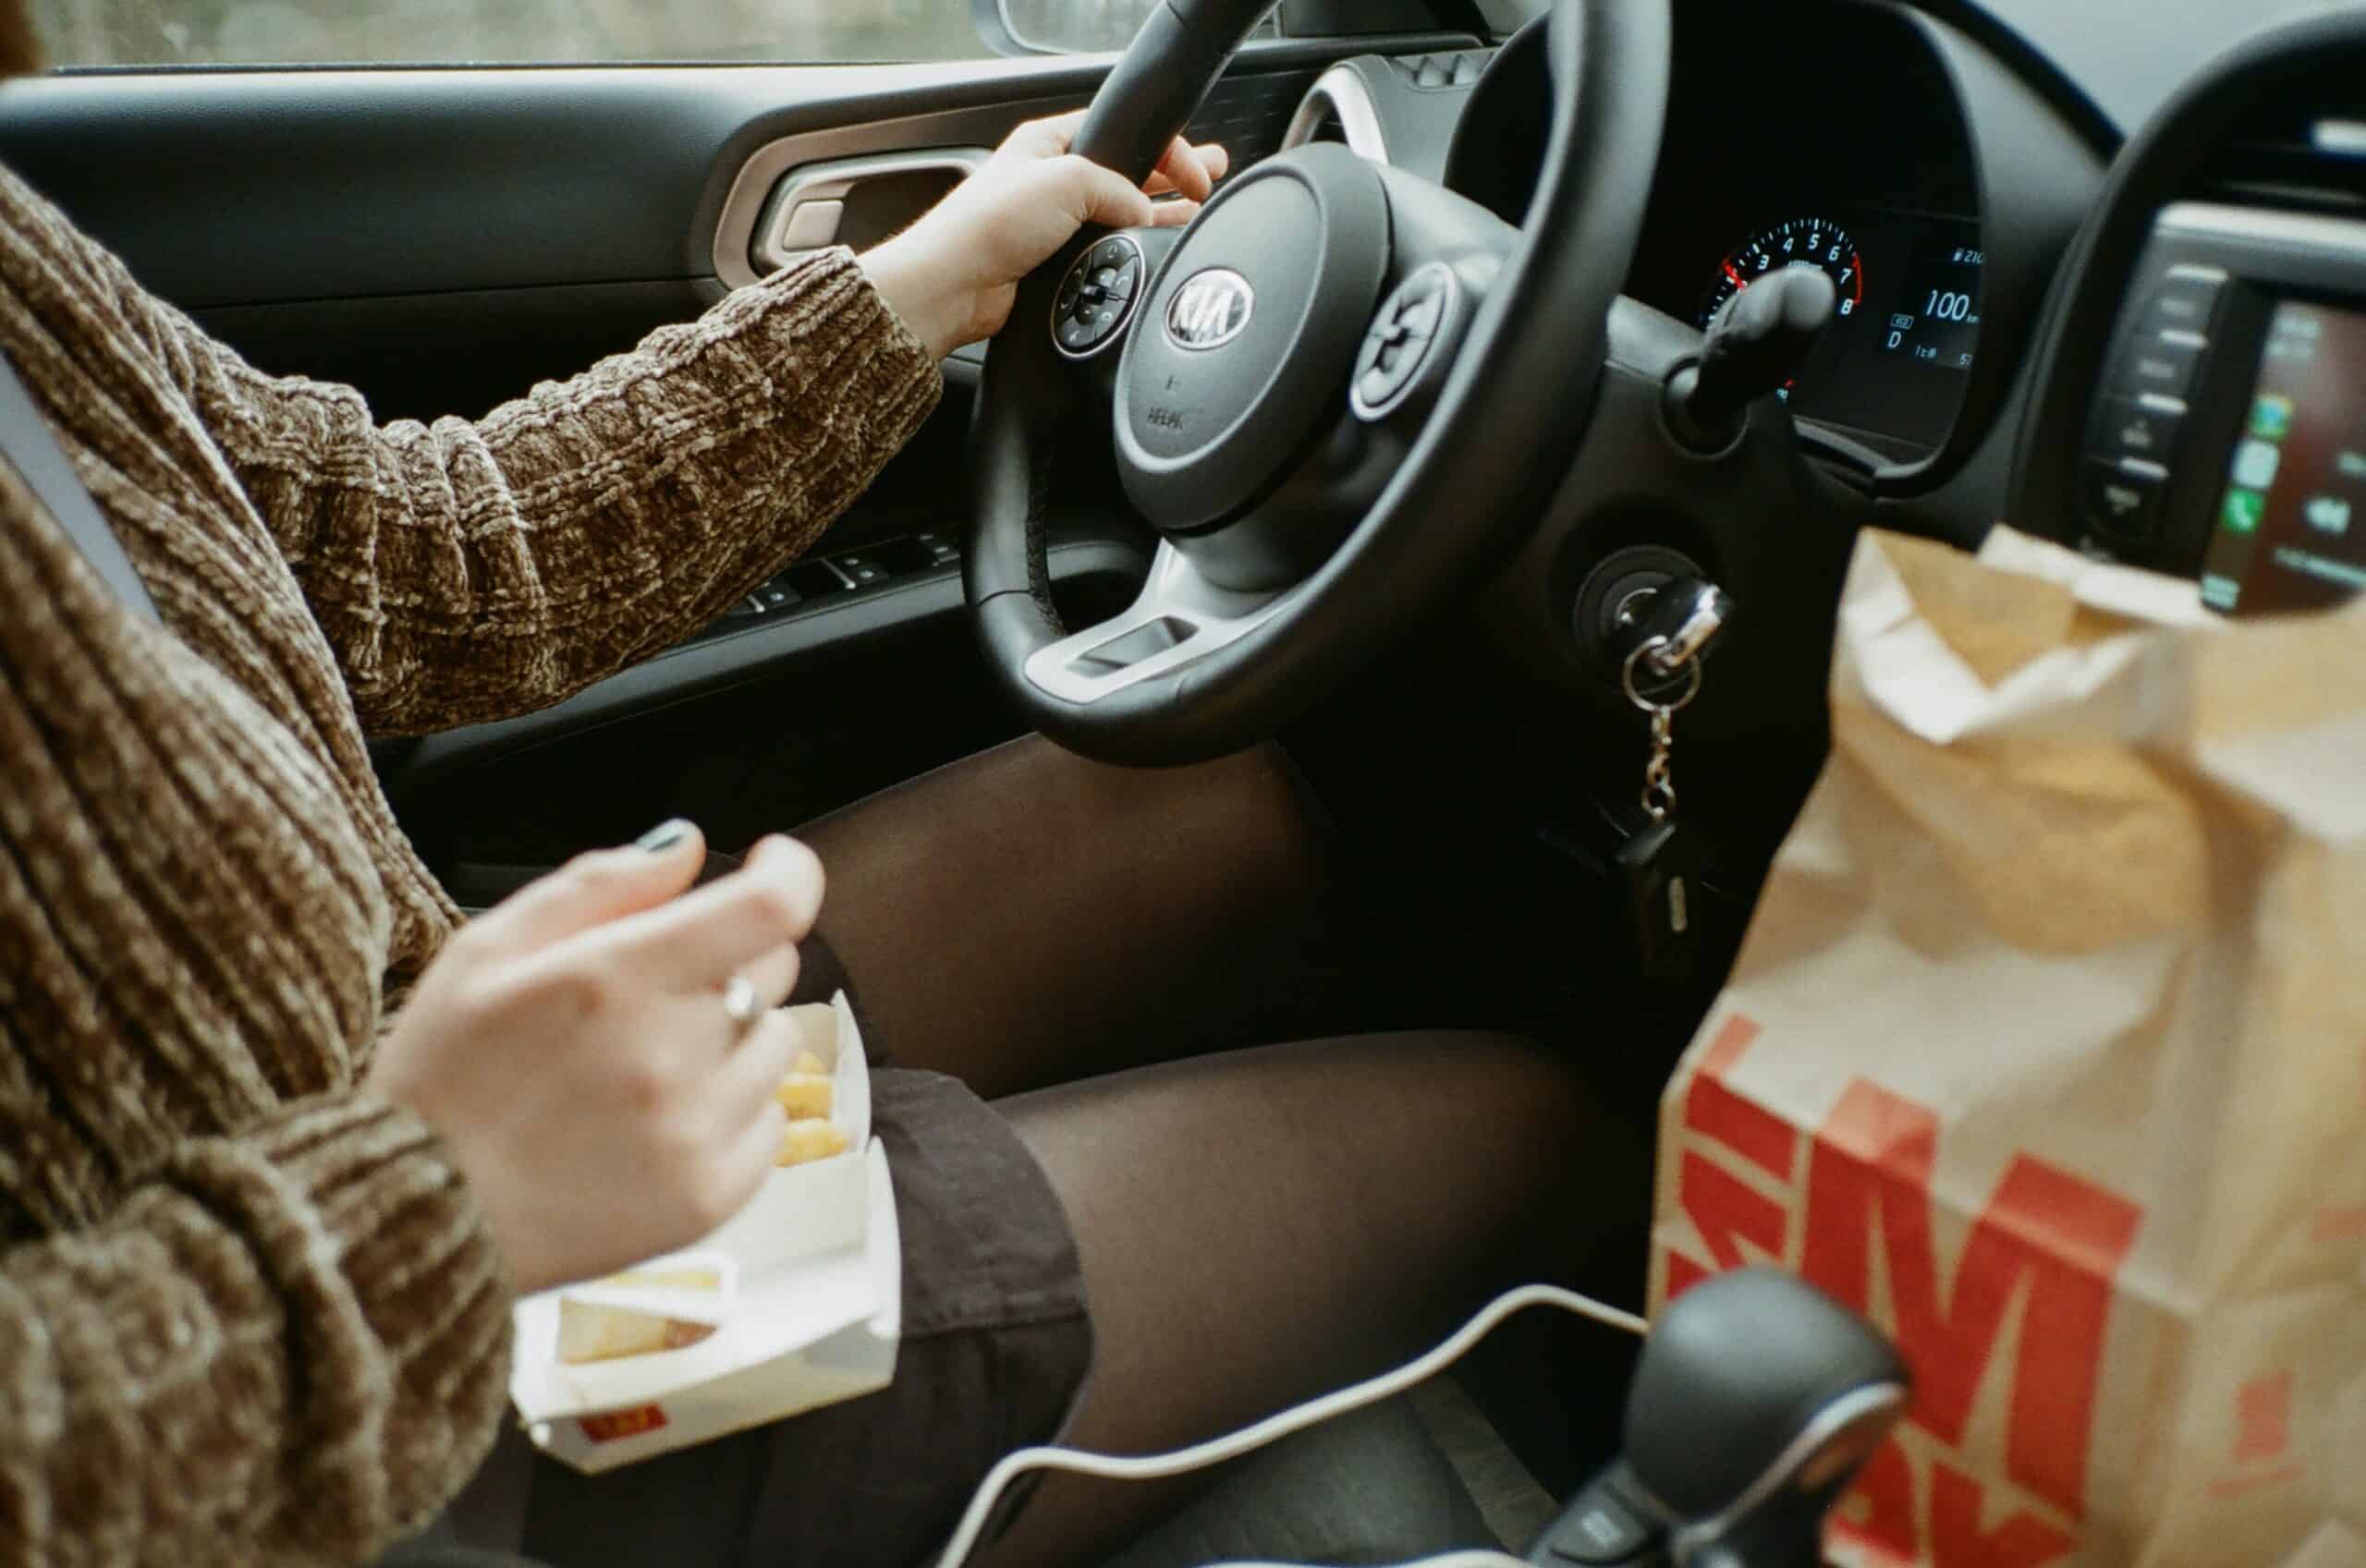 Is It Illegal To Eat and Drive?